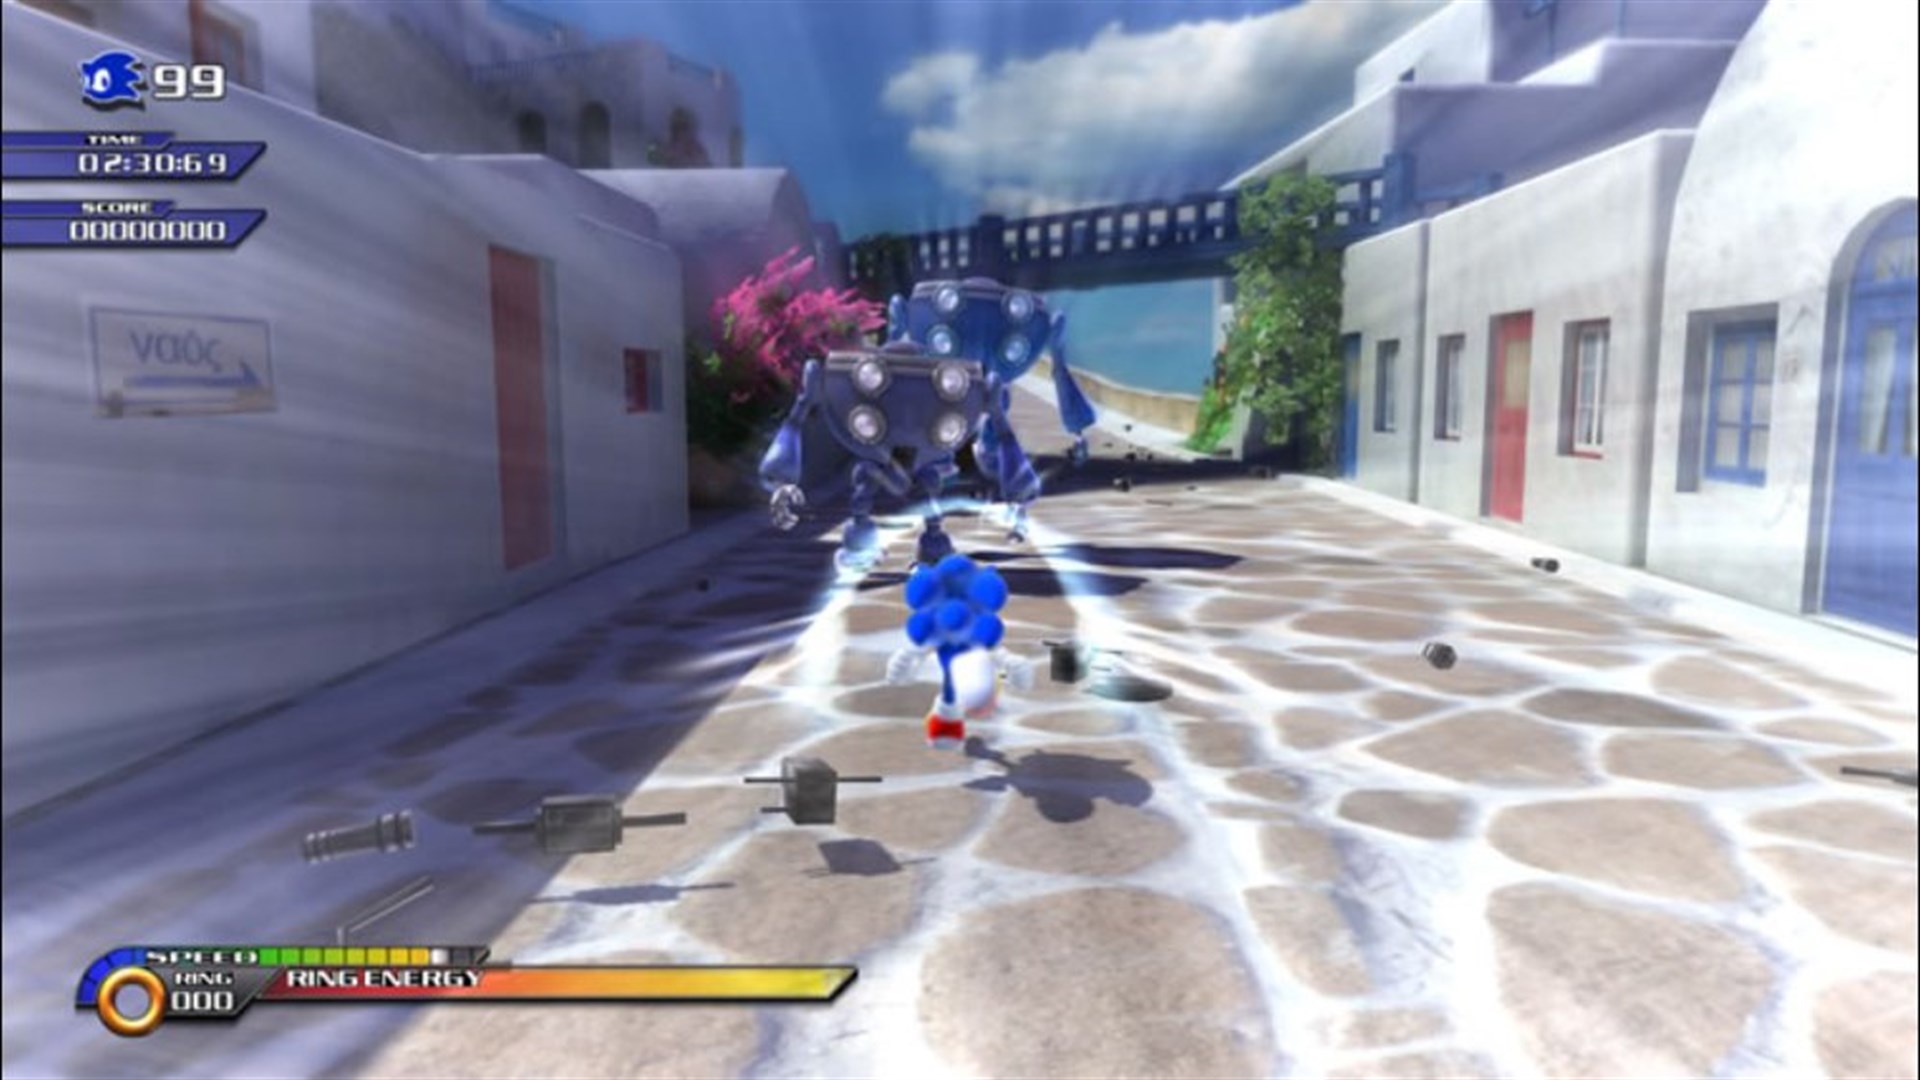 sonic unleashed xbox one price